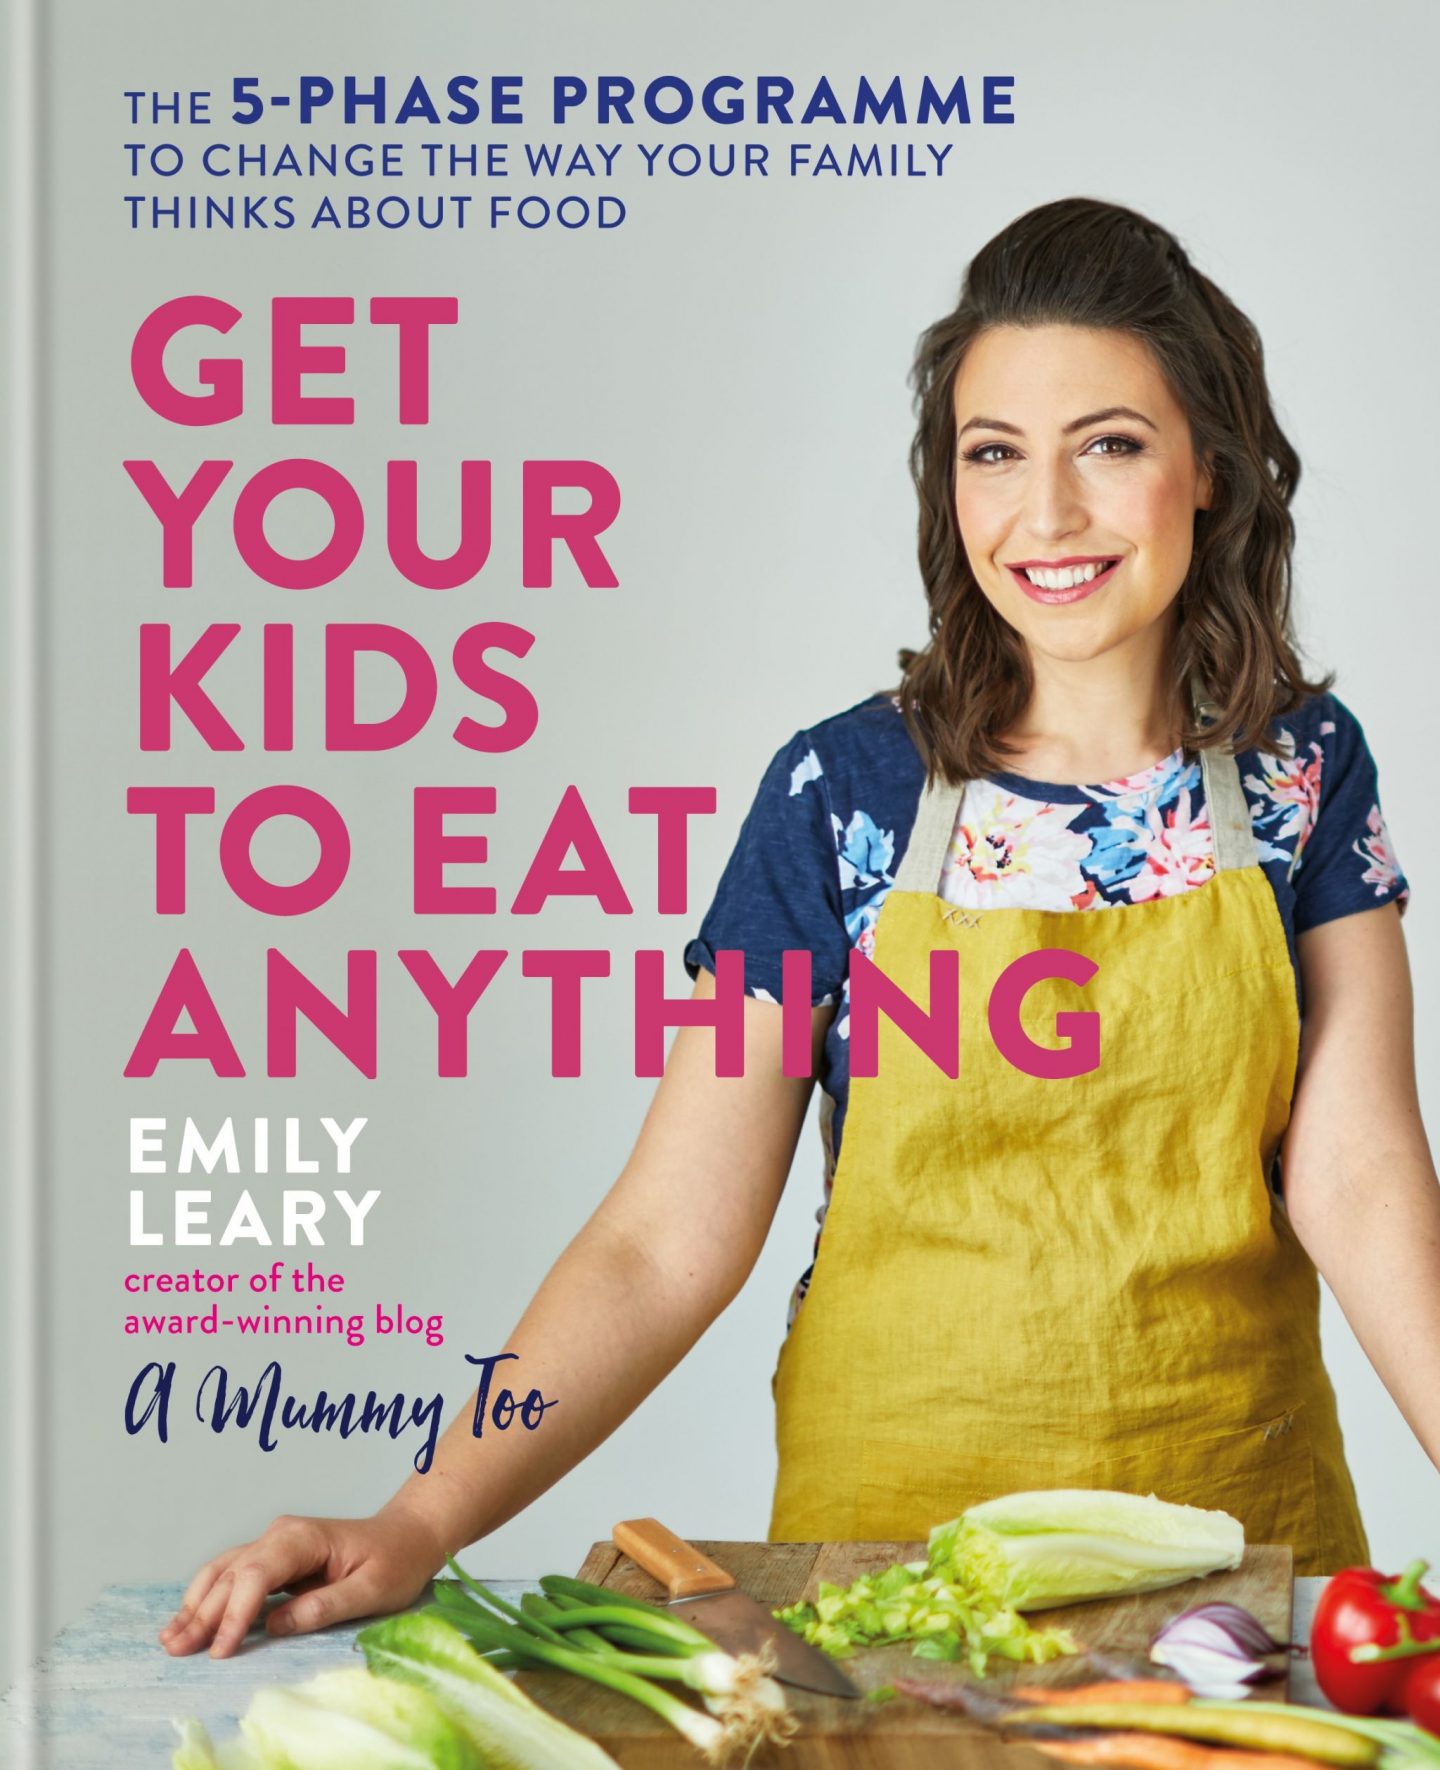 Get Your Kids to Eat Anything, fussy eaters, picky eaters, family food, Emily Leary, Amummytoo, a mummy too, dad blog uk, dadbloguk q and q, dadbloguk q&a, uk dad blog, sahd, wahd